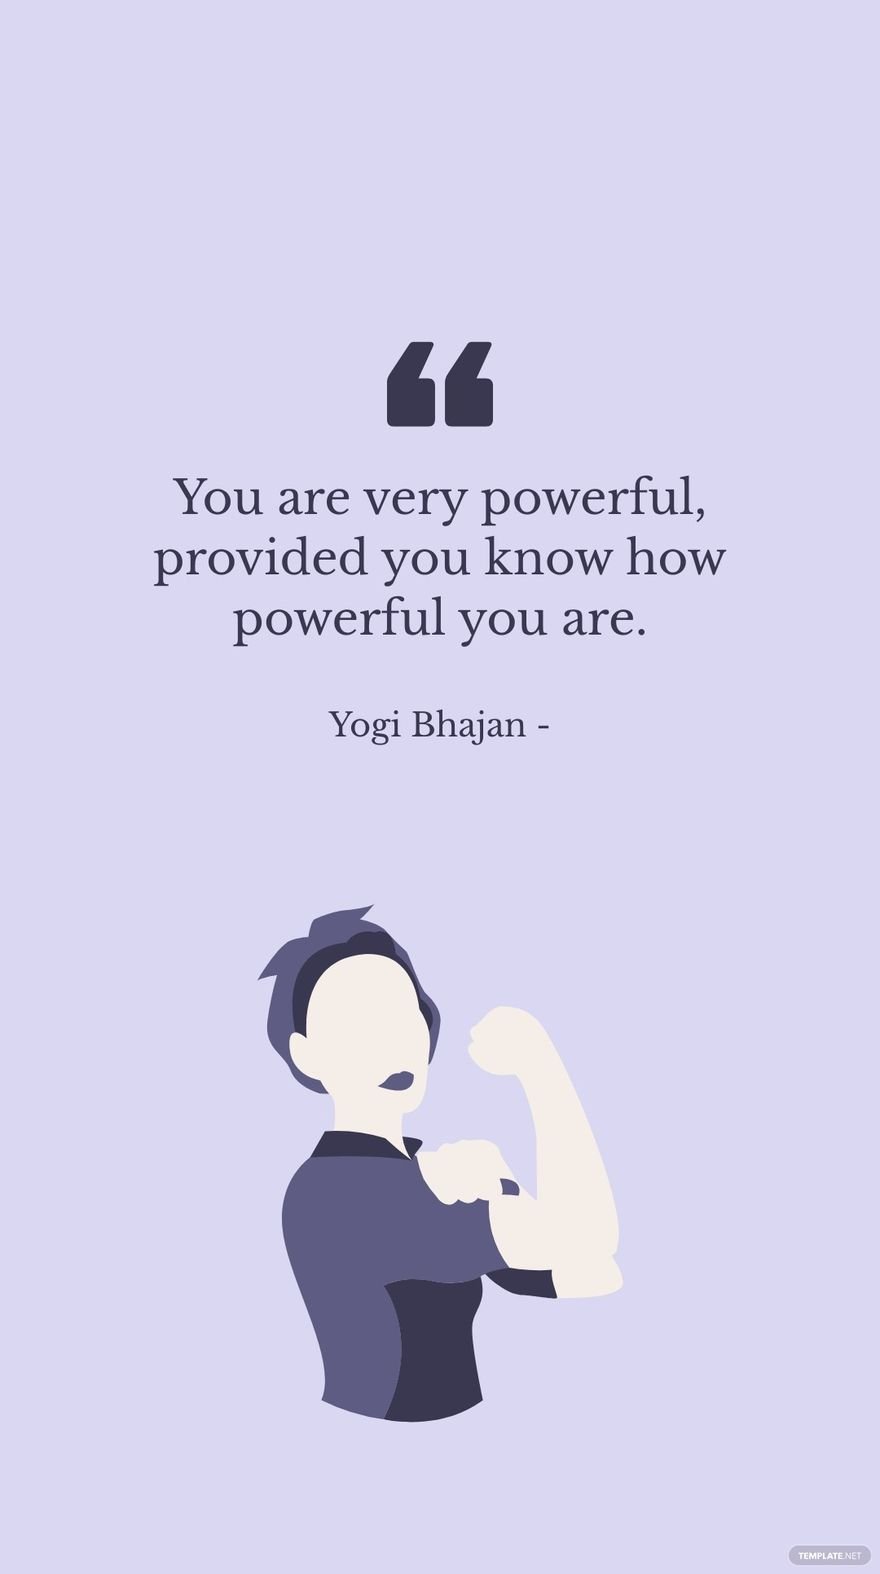 Free Yogi Bhajan - You are very powerful, provided you know how powerful you are.